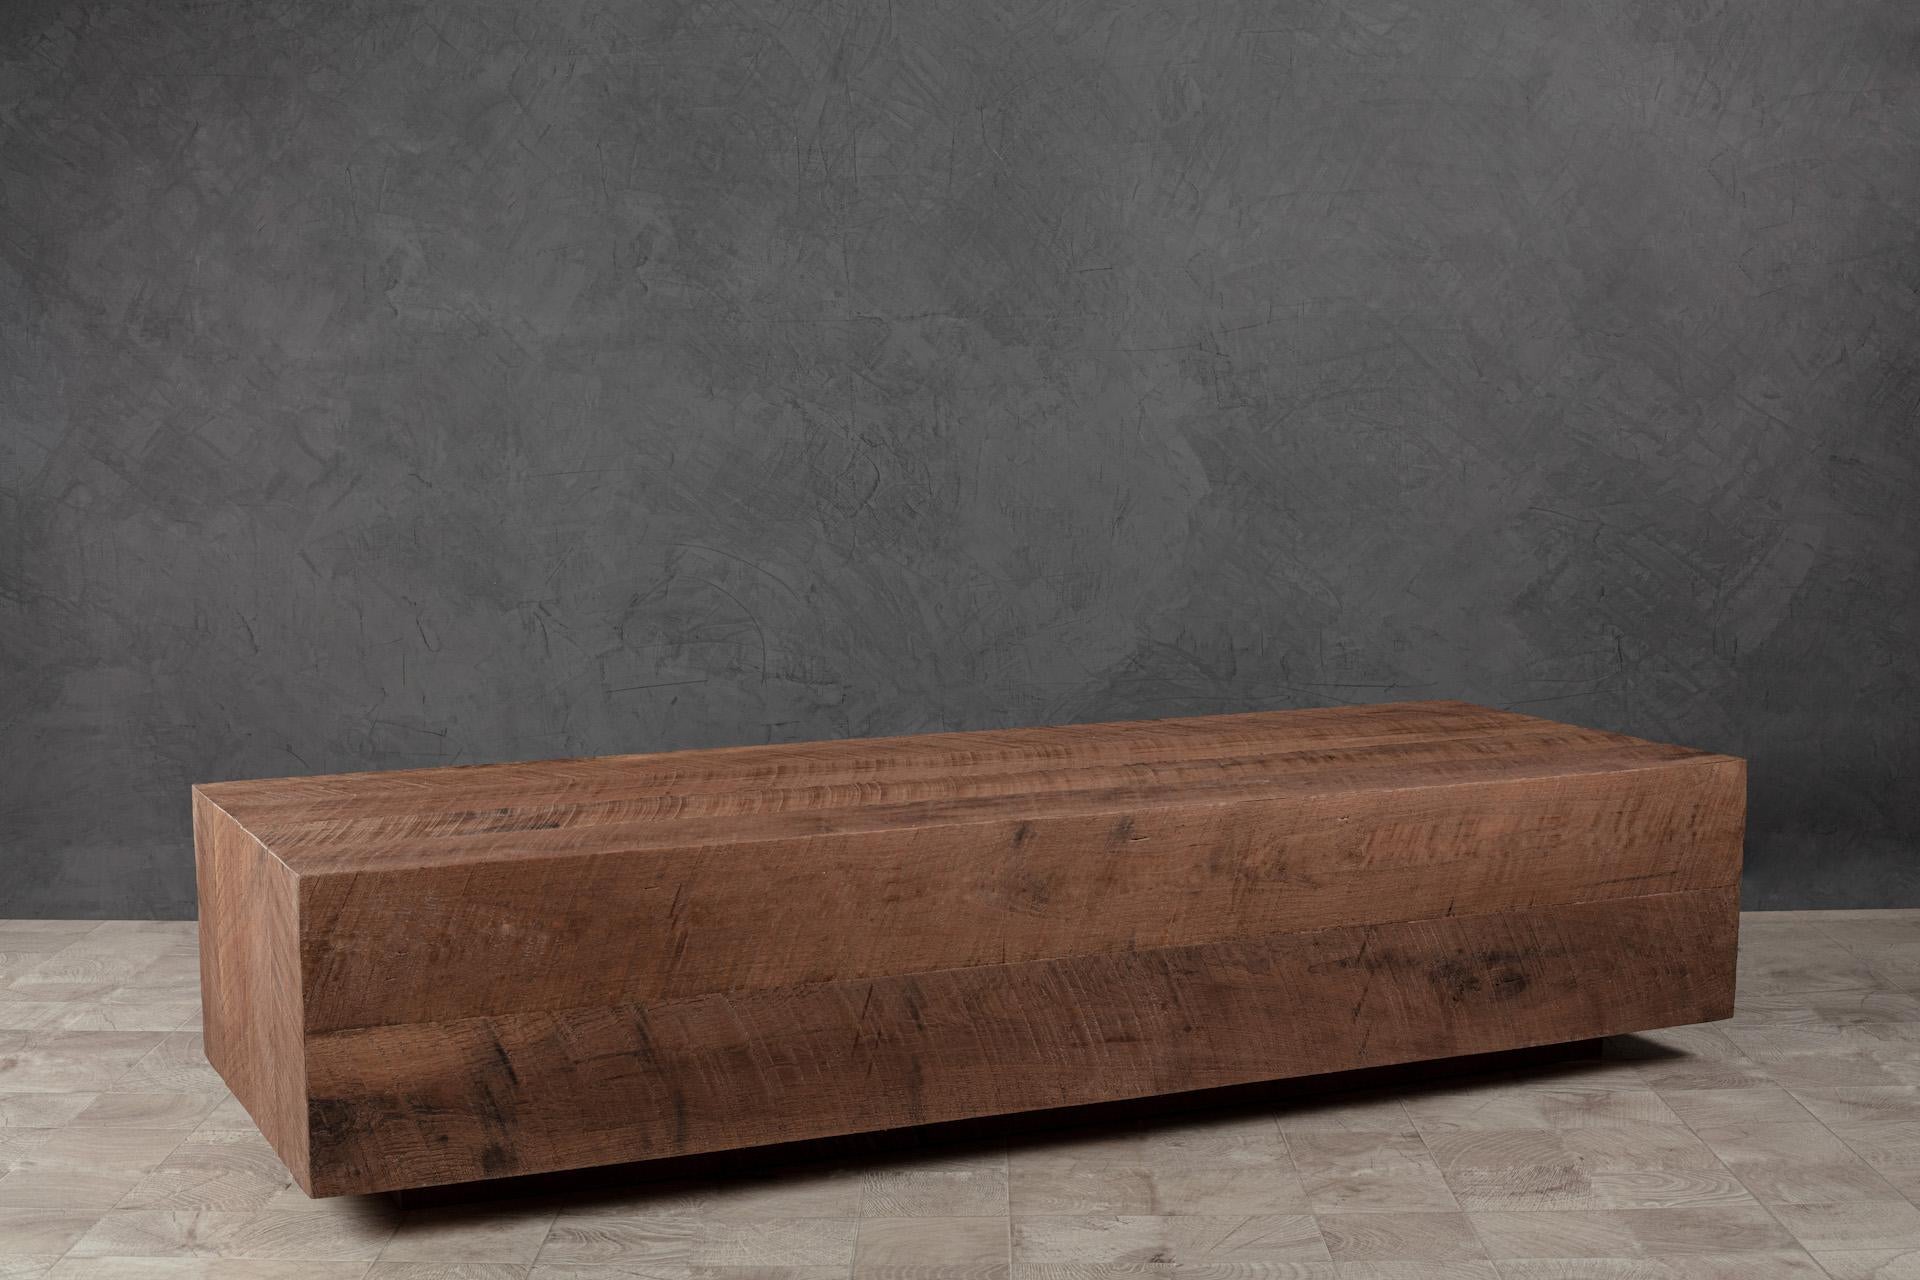 This industrial dense hardwood bench is artisan crafted with meticulous care. It´s texture and geometric shape made with black walnut or red oak have natural variations in grain and hue that bring warmth to the clean, geometric silhouette.
